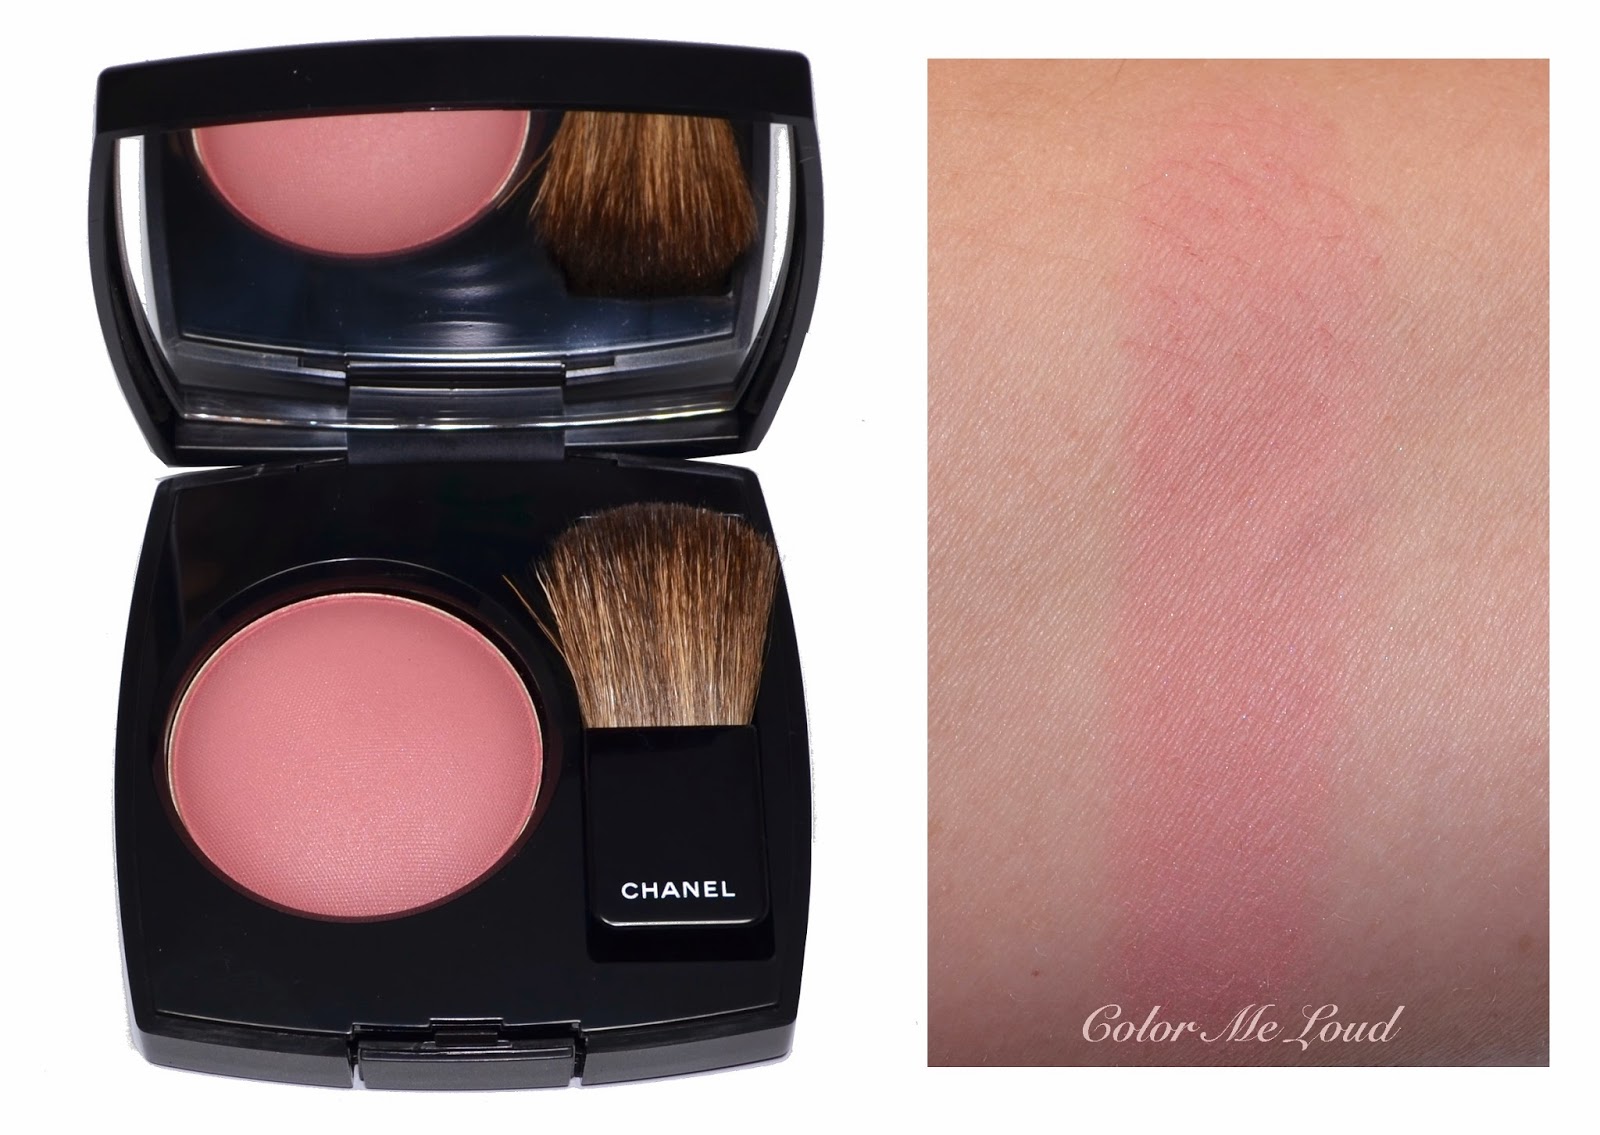 Chanel Innocence (160) Joues Contraste Powder Blush Review, Photos,  Swatches